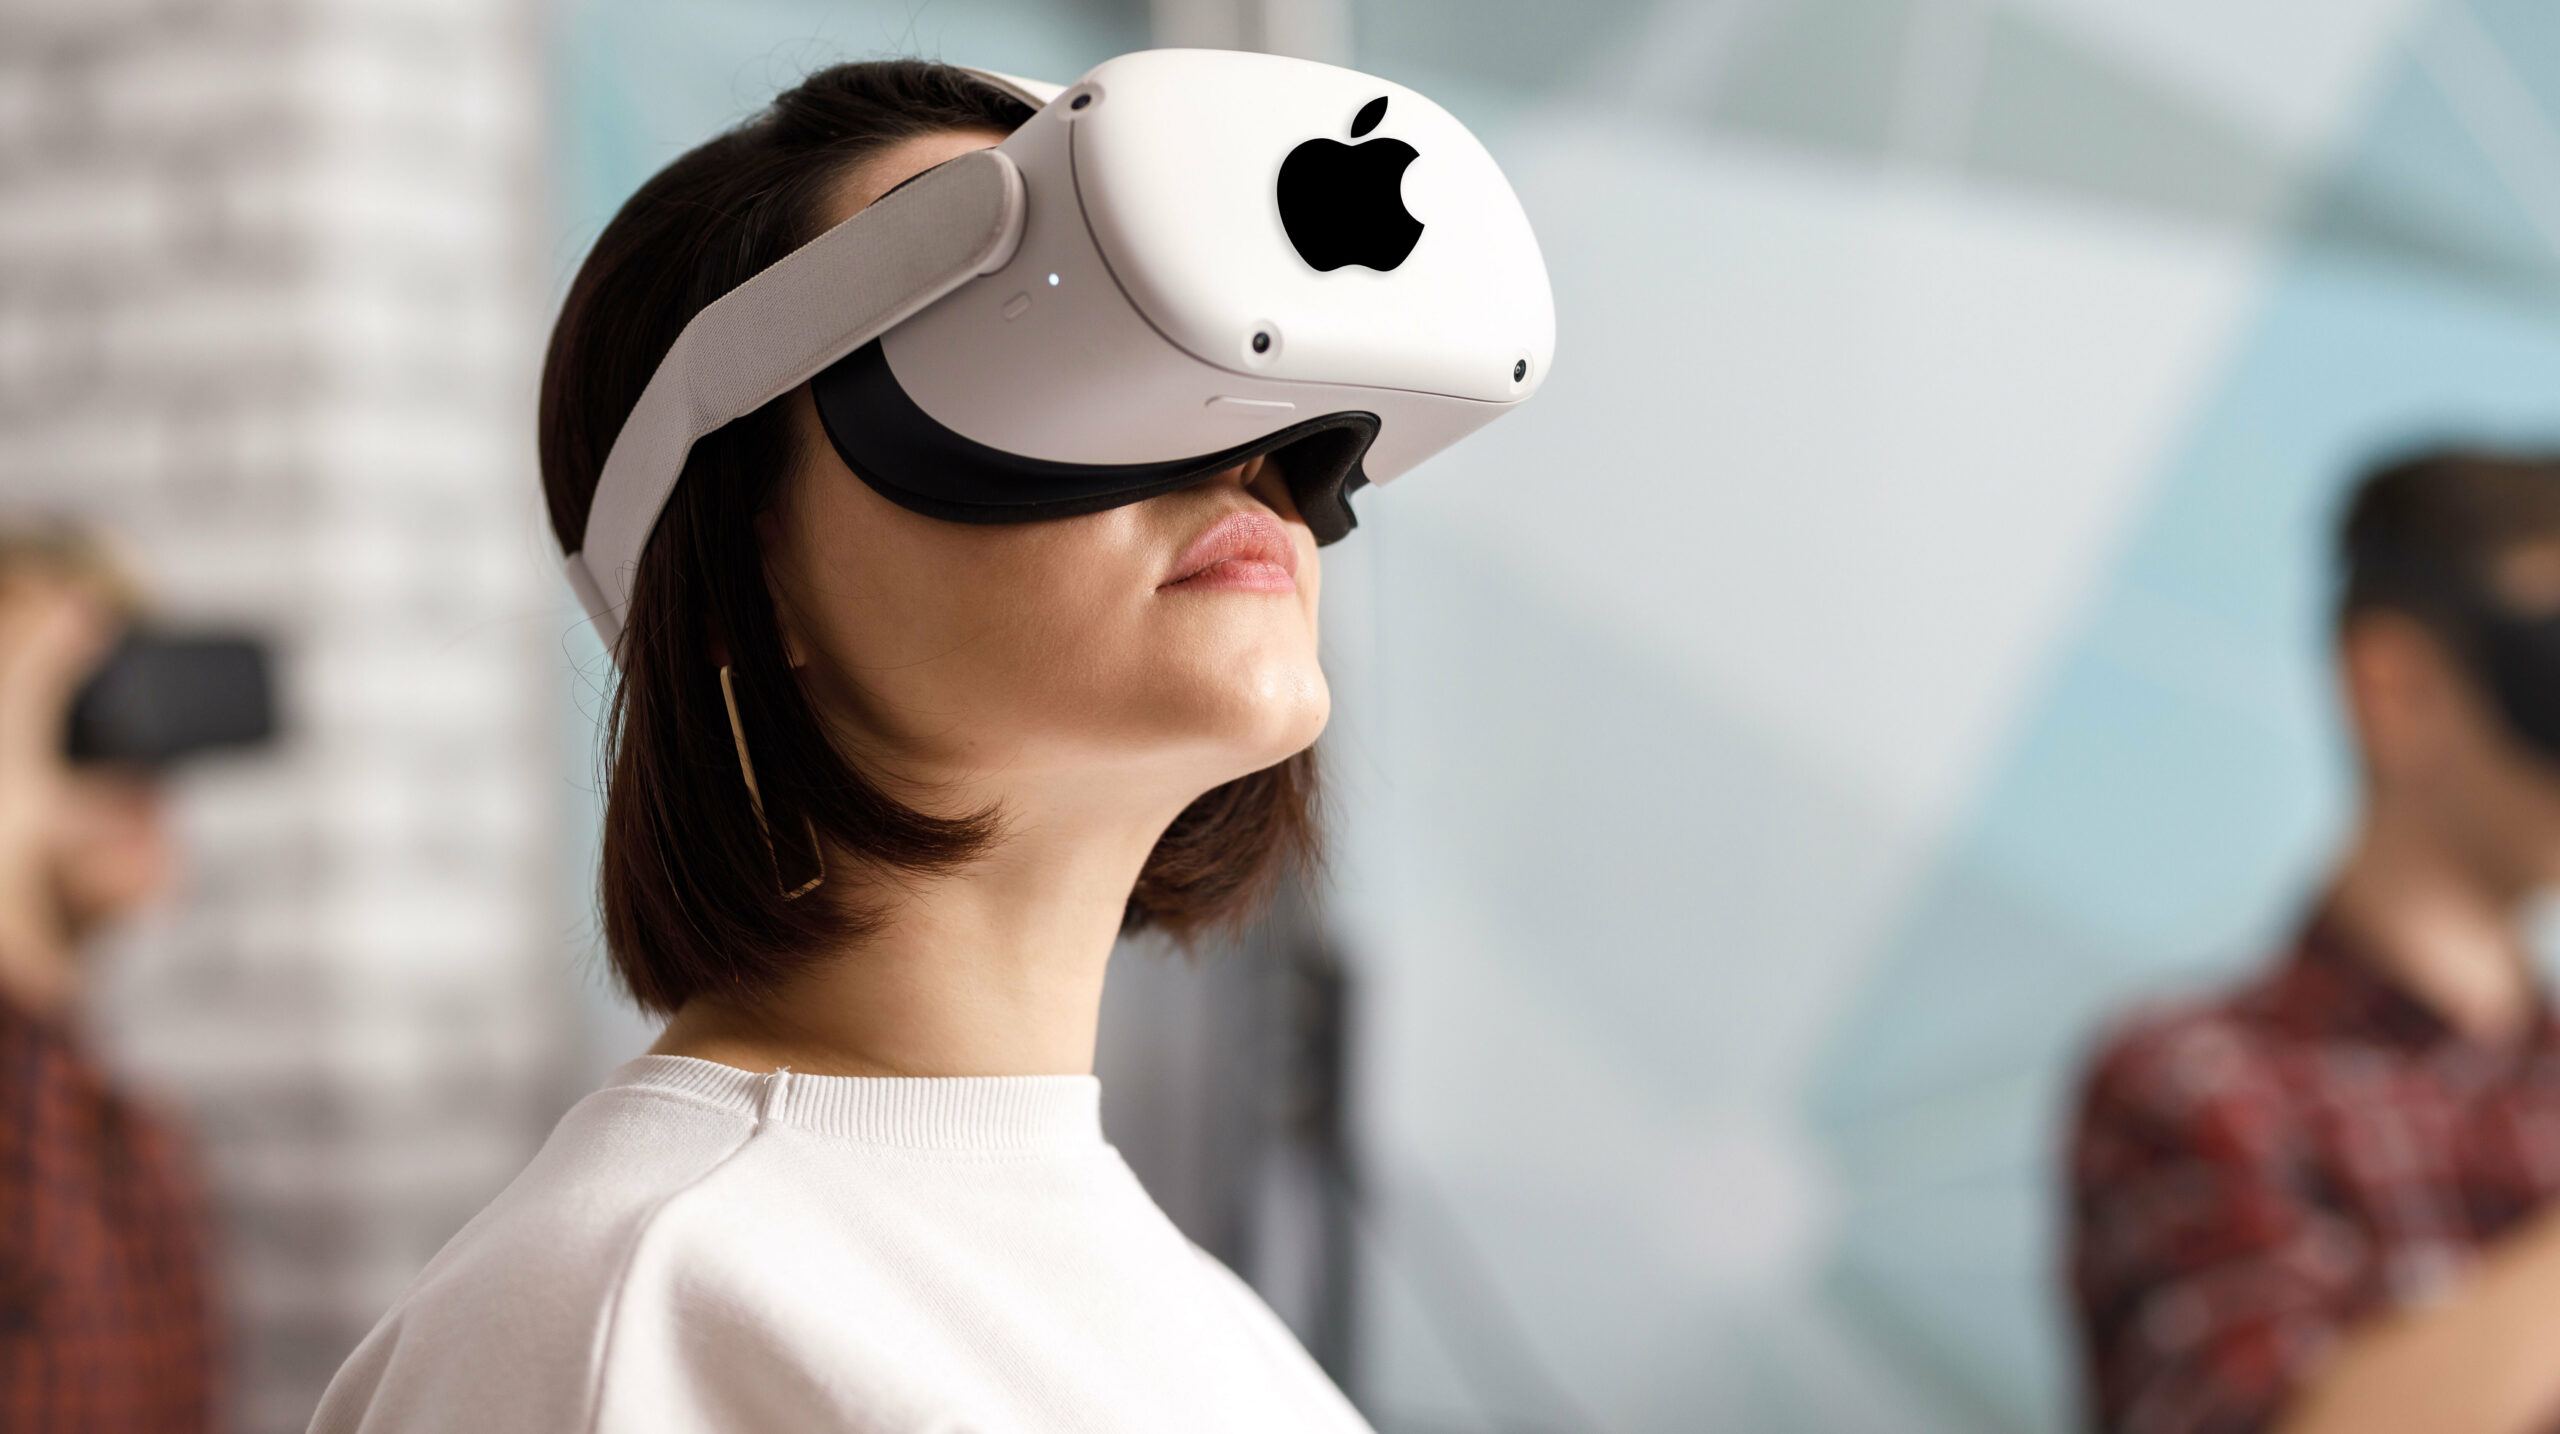 Apple’s rumoured mixed reality headset could be called ‘Reality Pro,’ offer iOS-like features